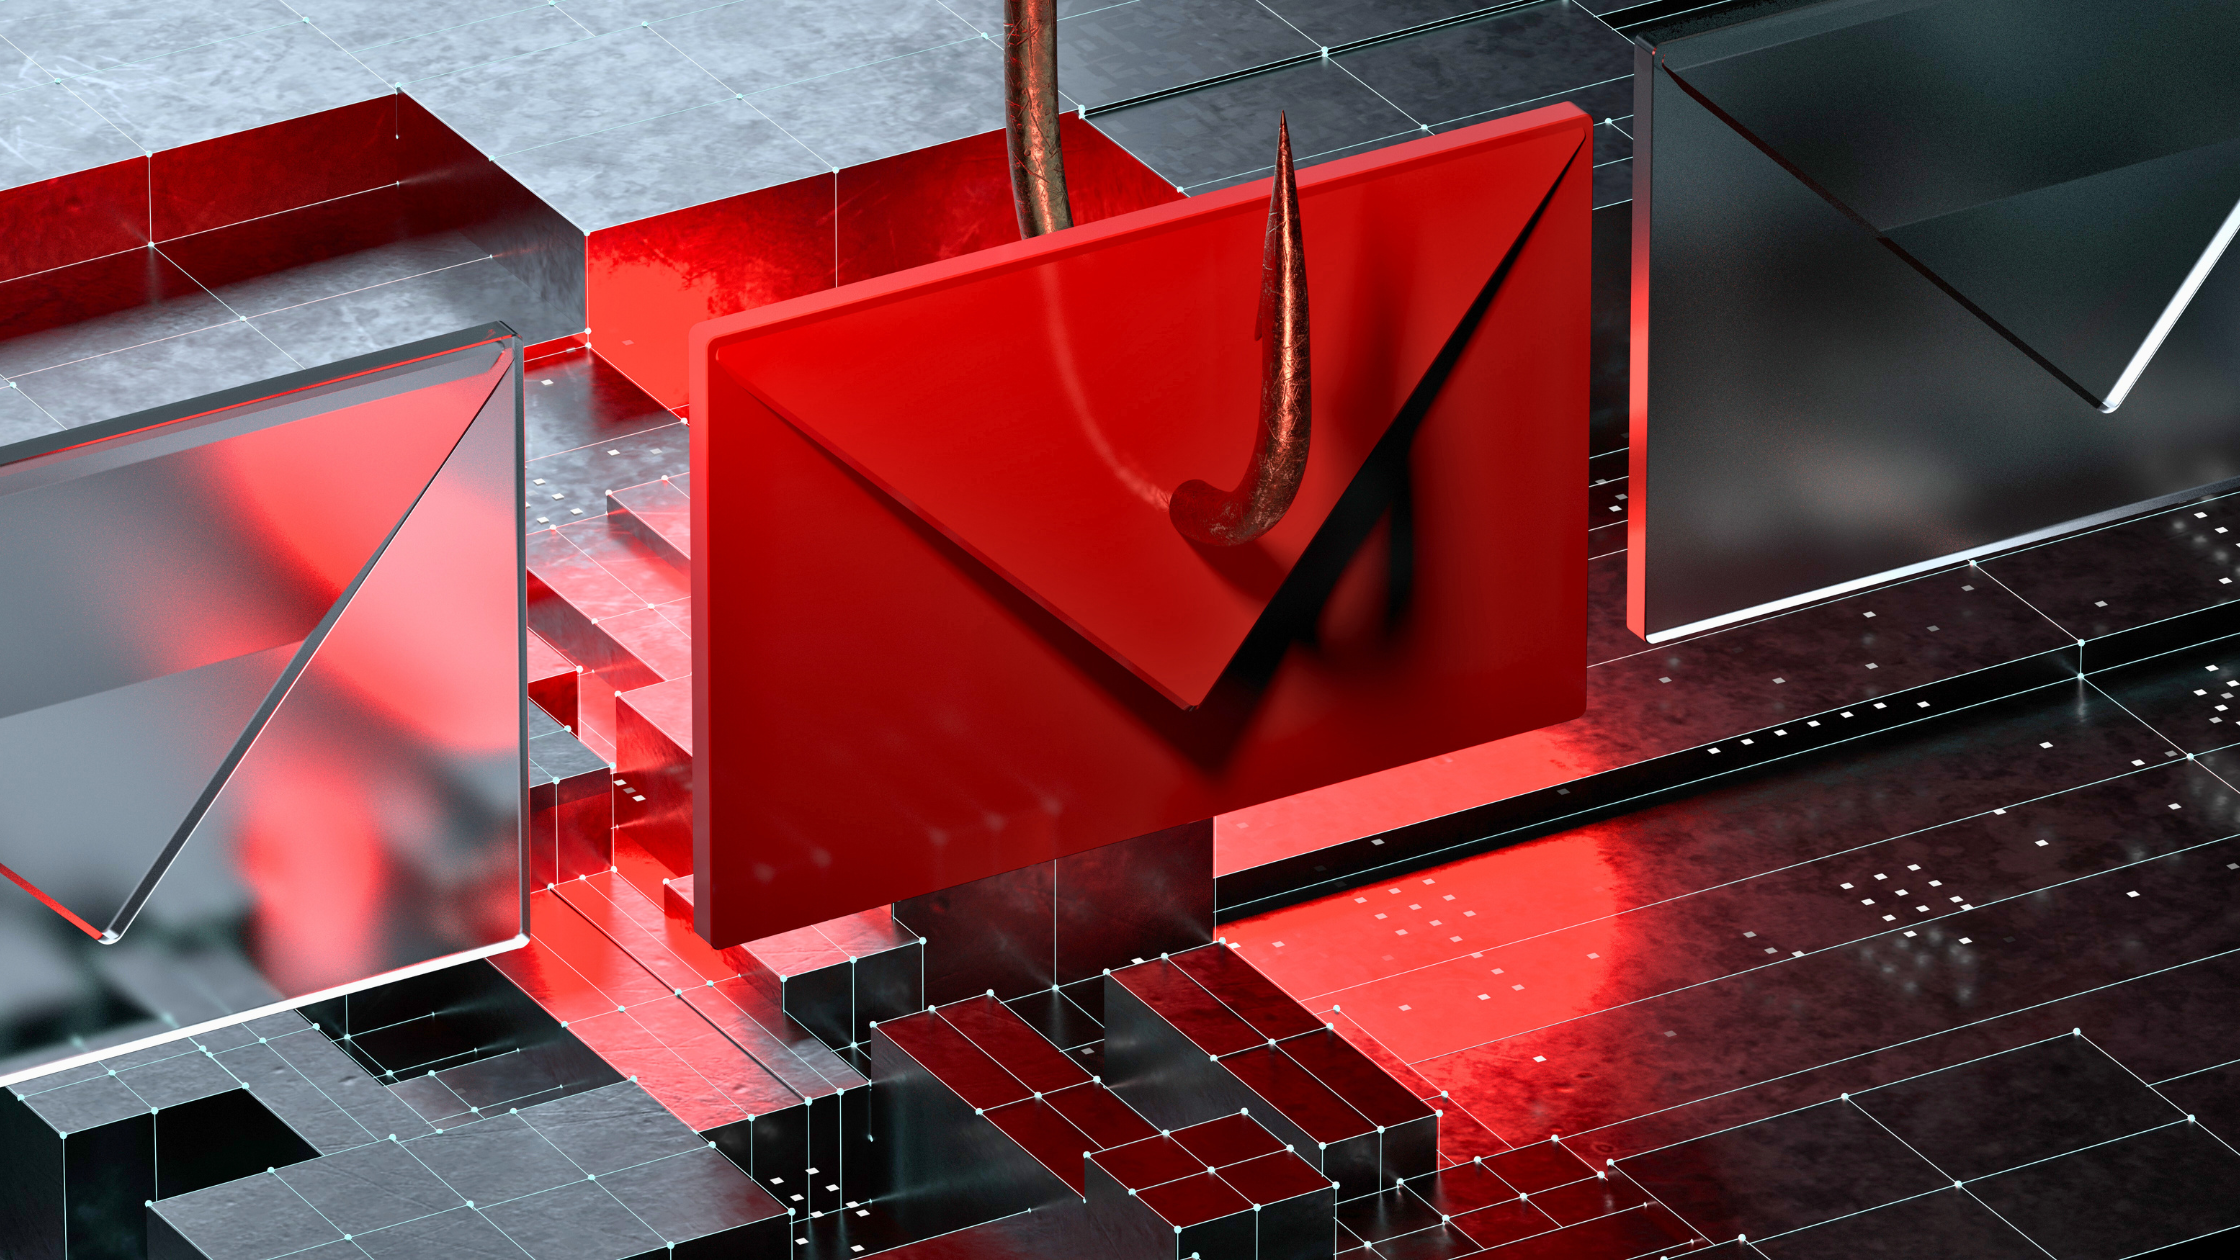 Learn how to protect yourself from common email scams with our comprehensive guide. Discover the red flags to watch for and essential tips to keep your personal and business accounts safe from phishing attacks.